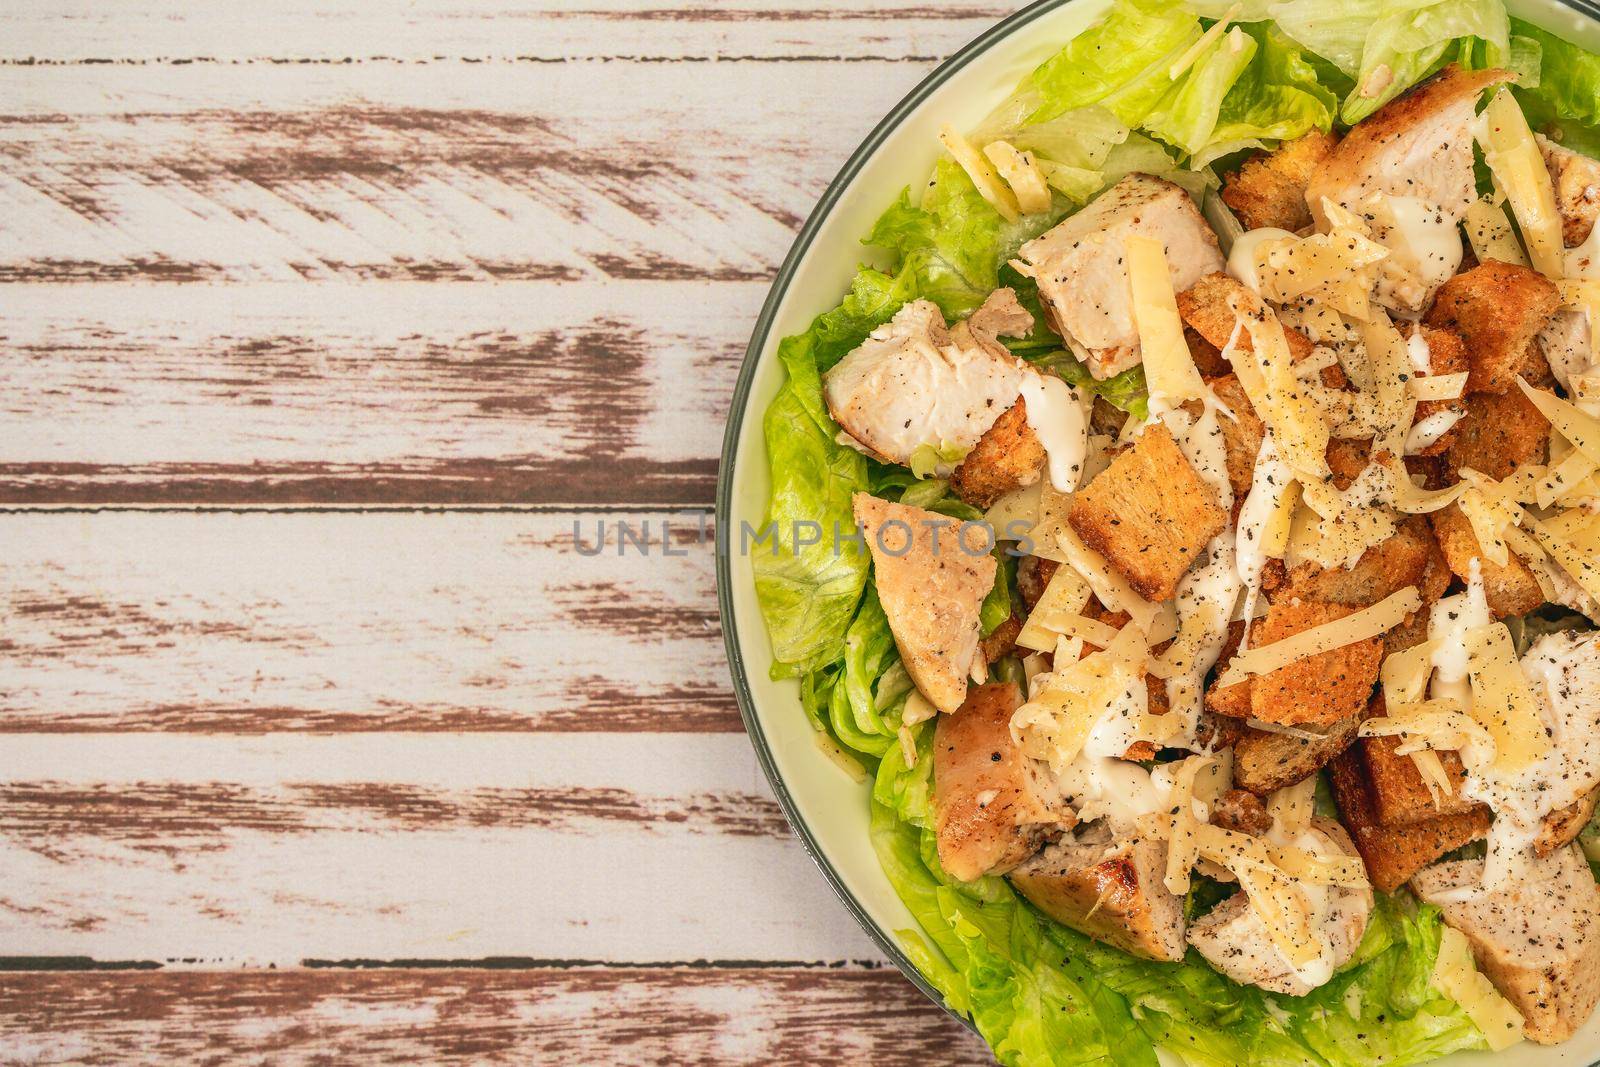 Exquisite Caesar salad with small bites of chicken and a traditional aioli sauce in a small bowl on a rustic table. Top view. Close-up detail. Large Copy space.